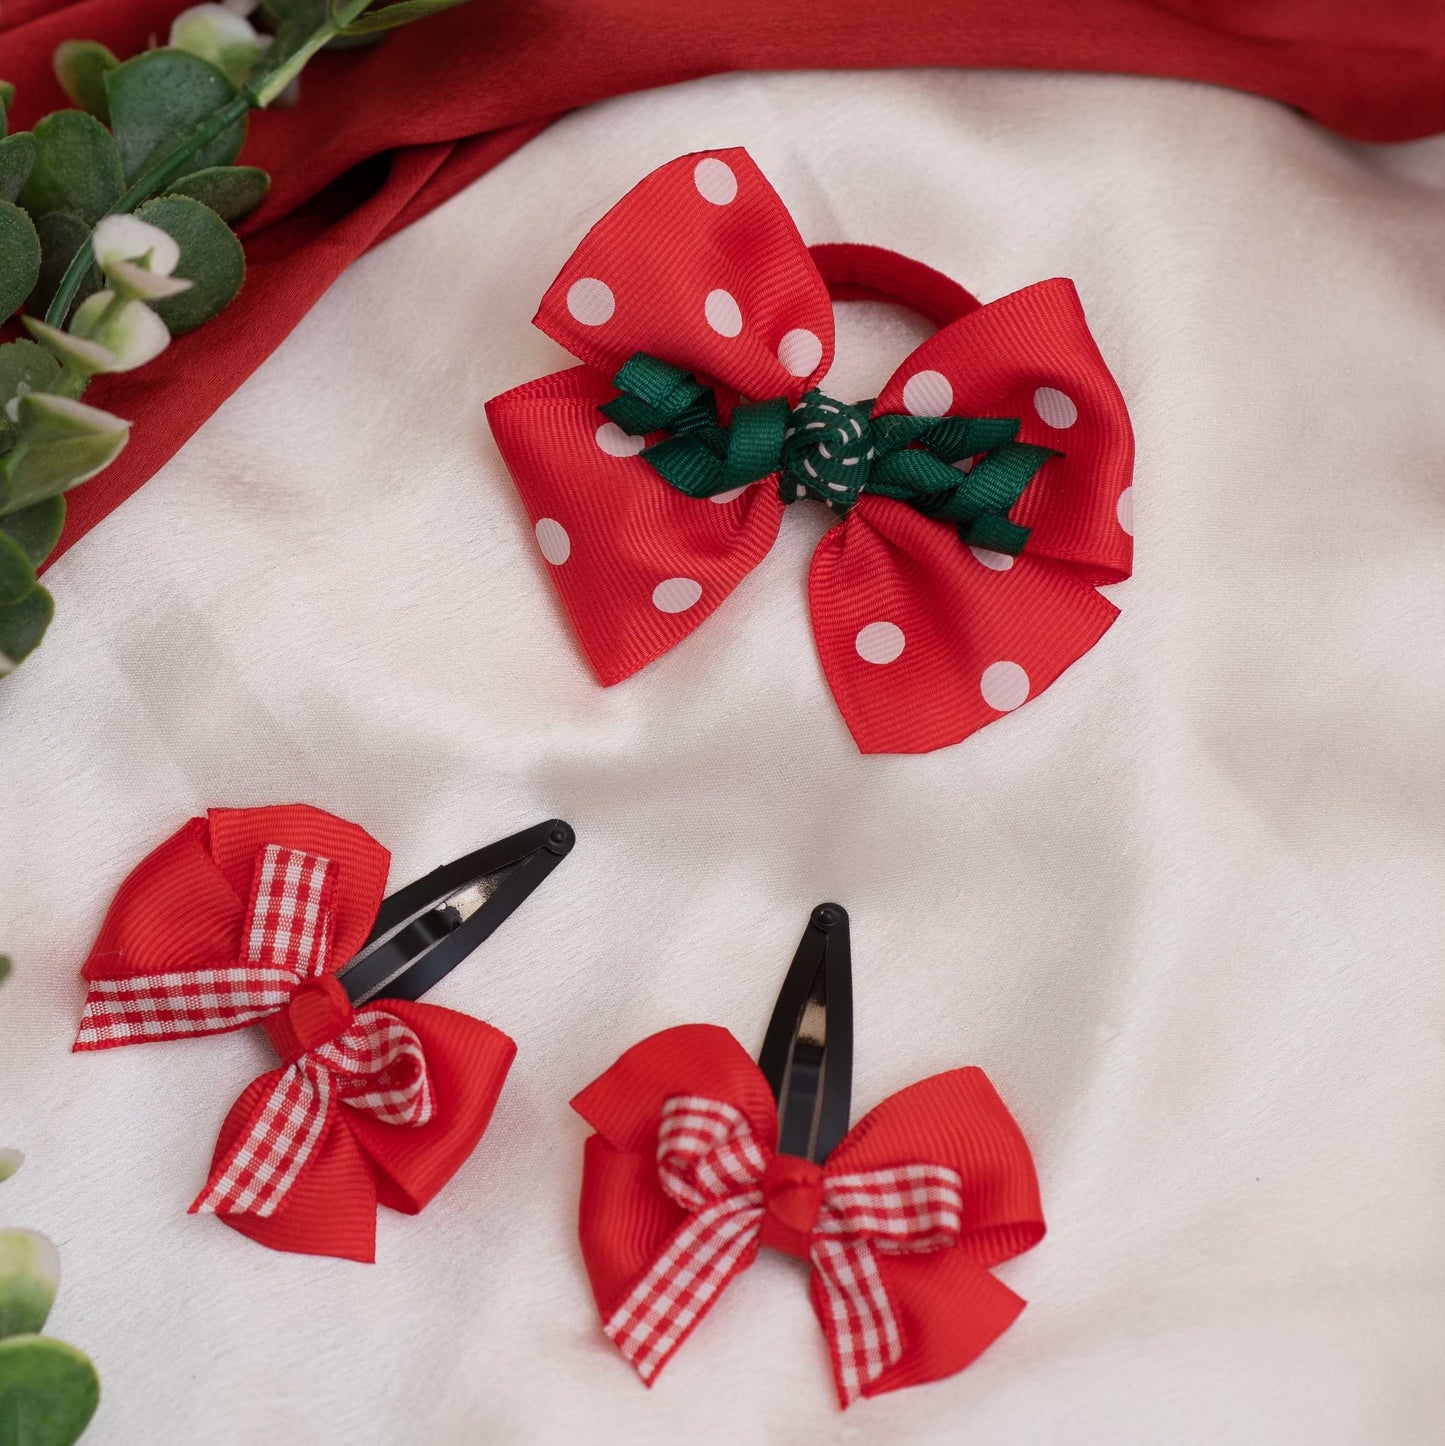 Combo: Checkered Bow Design tic-tac pins and polka dot rubberband - Red (Set of 1 pairs, 1 single bow 3 quantity)